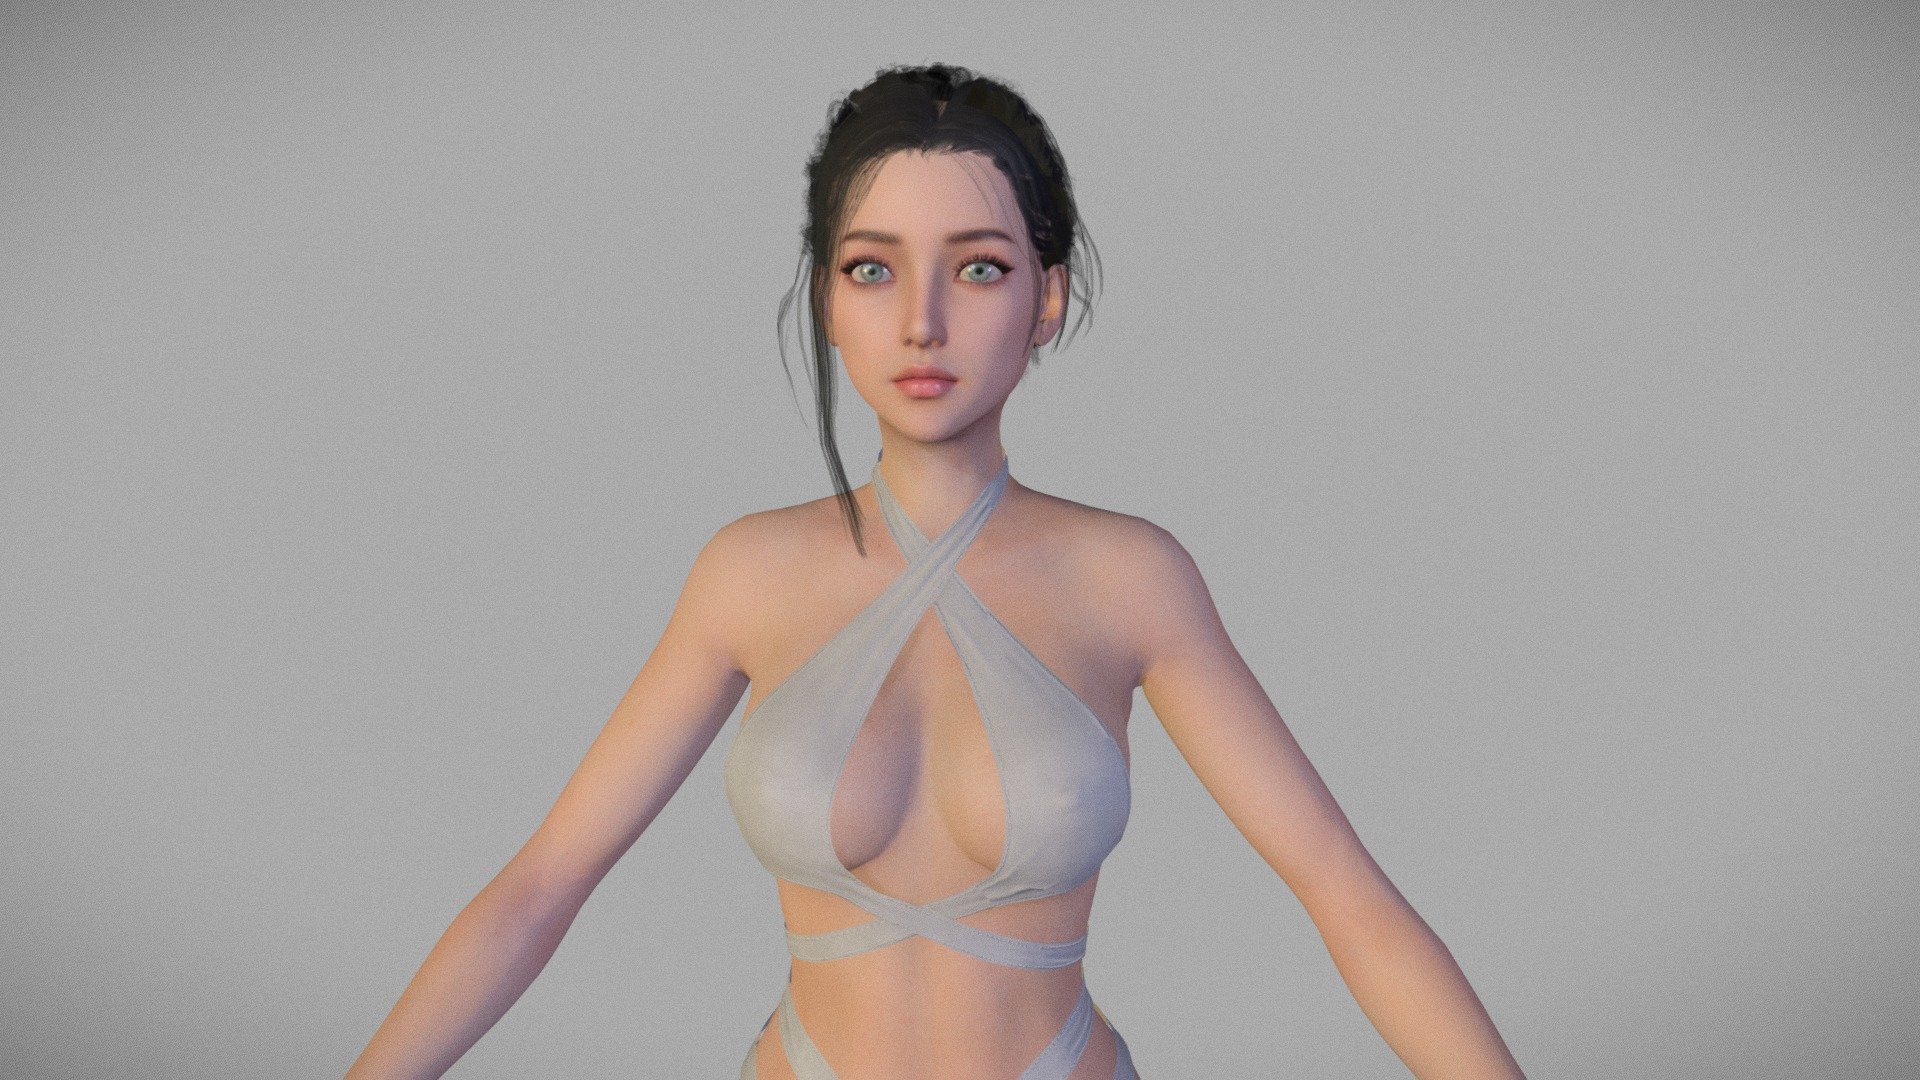 [FULL PRODUCT ON ARTSTATION](https://www.artstation.com/a/2012589 

Full Version Features:


Body Rigged to Epic Skeleton 
Face Rigged with ARkit Blendshapes
Unreal Engine Project (+Live-Link and Customization blueprints), 
Blender Project, and 
FBX files + textures.

This character is part of my Unreal Engine character creation system. Create your own Game Character / Vtuber by easily changing all colours, modular outfit parts, hairstyle, face shape and much more!

See the full range of compatible items

This Sketchfab DEMO version is the UNRIGGED MODEL-ONLY, and NON COMMERCIAL 3d model